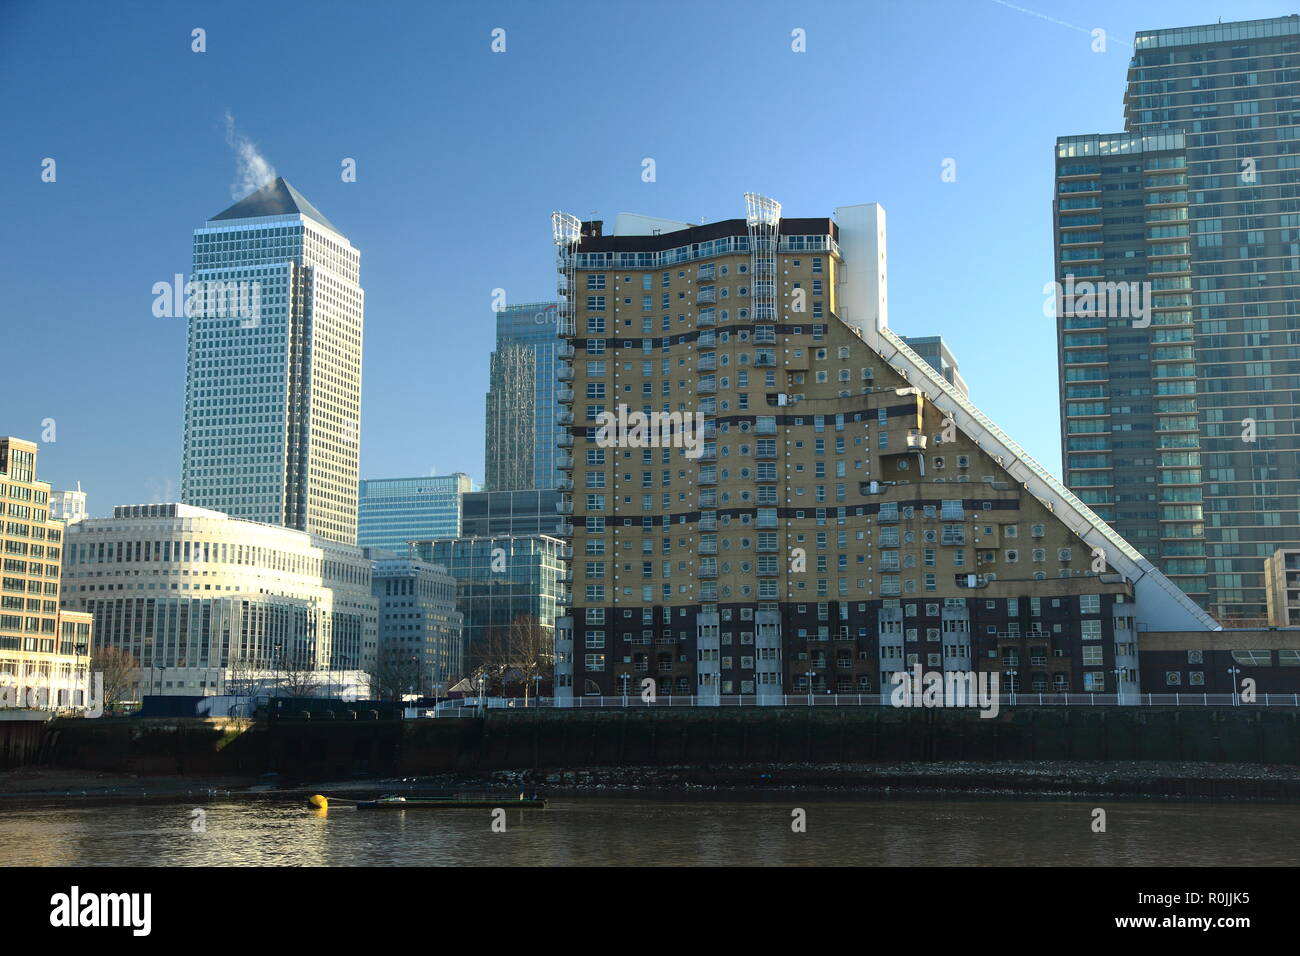 View of Canary Wharf from river Thames, London, UK. Stock Photo